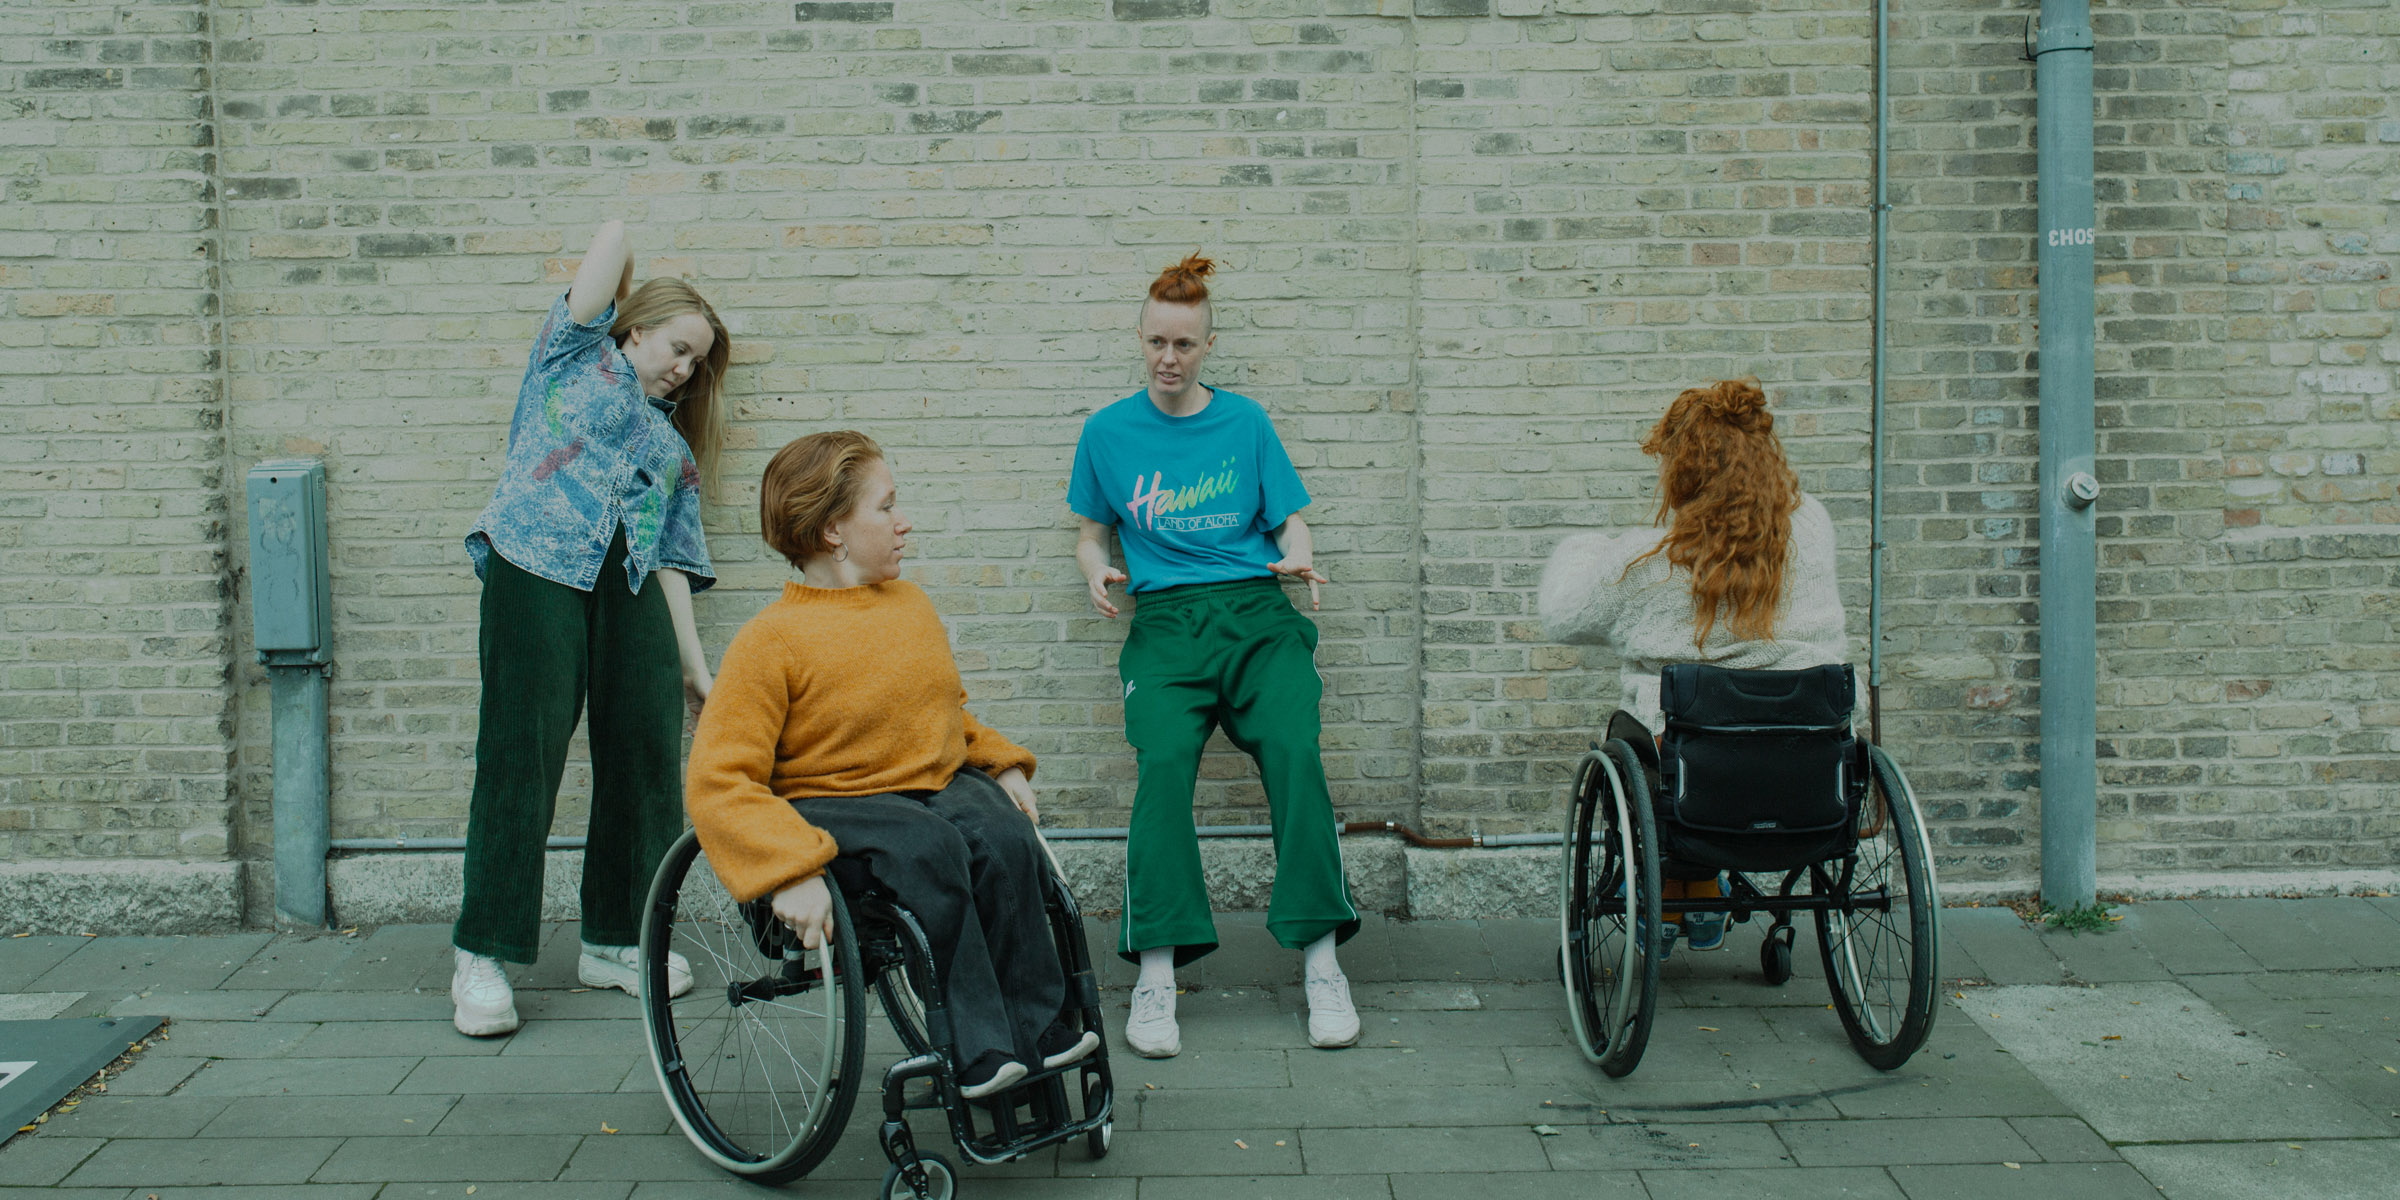 The image depicts four dancers wearing colorful workout clothes. Two of them are standing leaning against a yellow brick wall, the other two are each sitting in a wheelchair. Photo: Malin Johansson